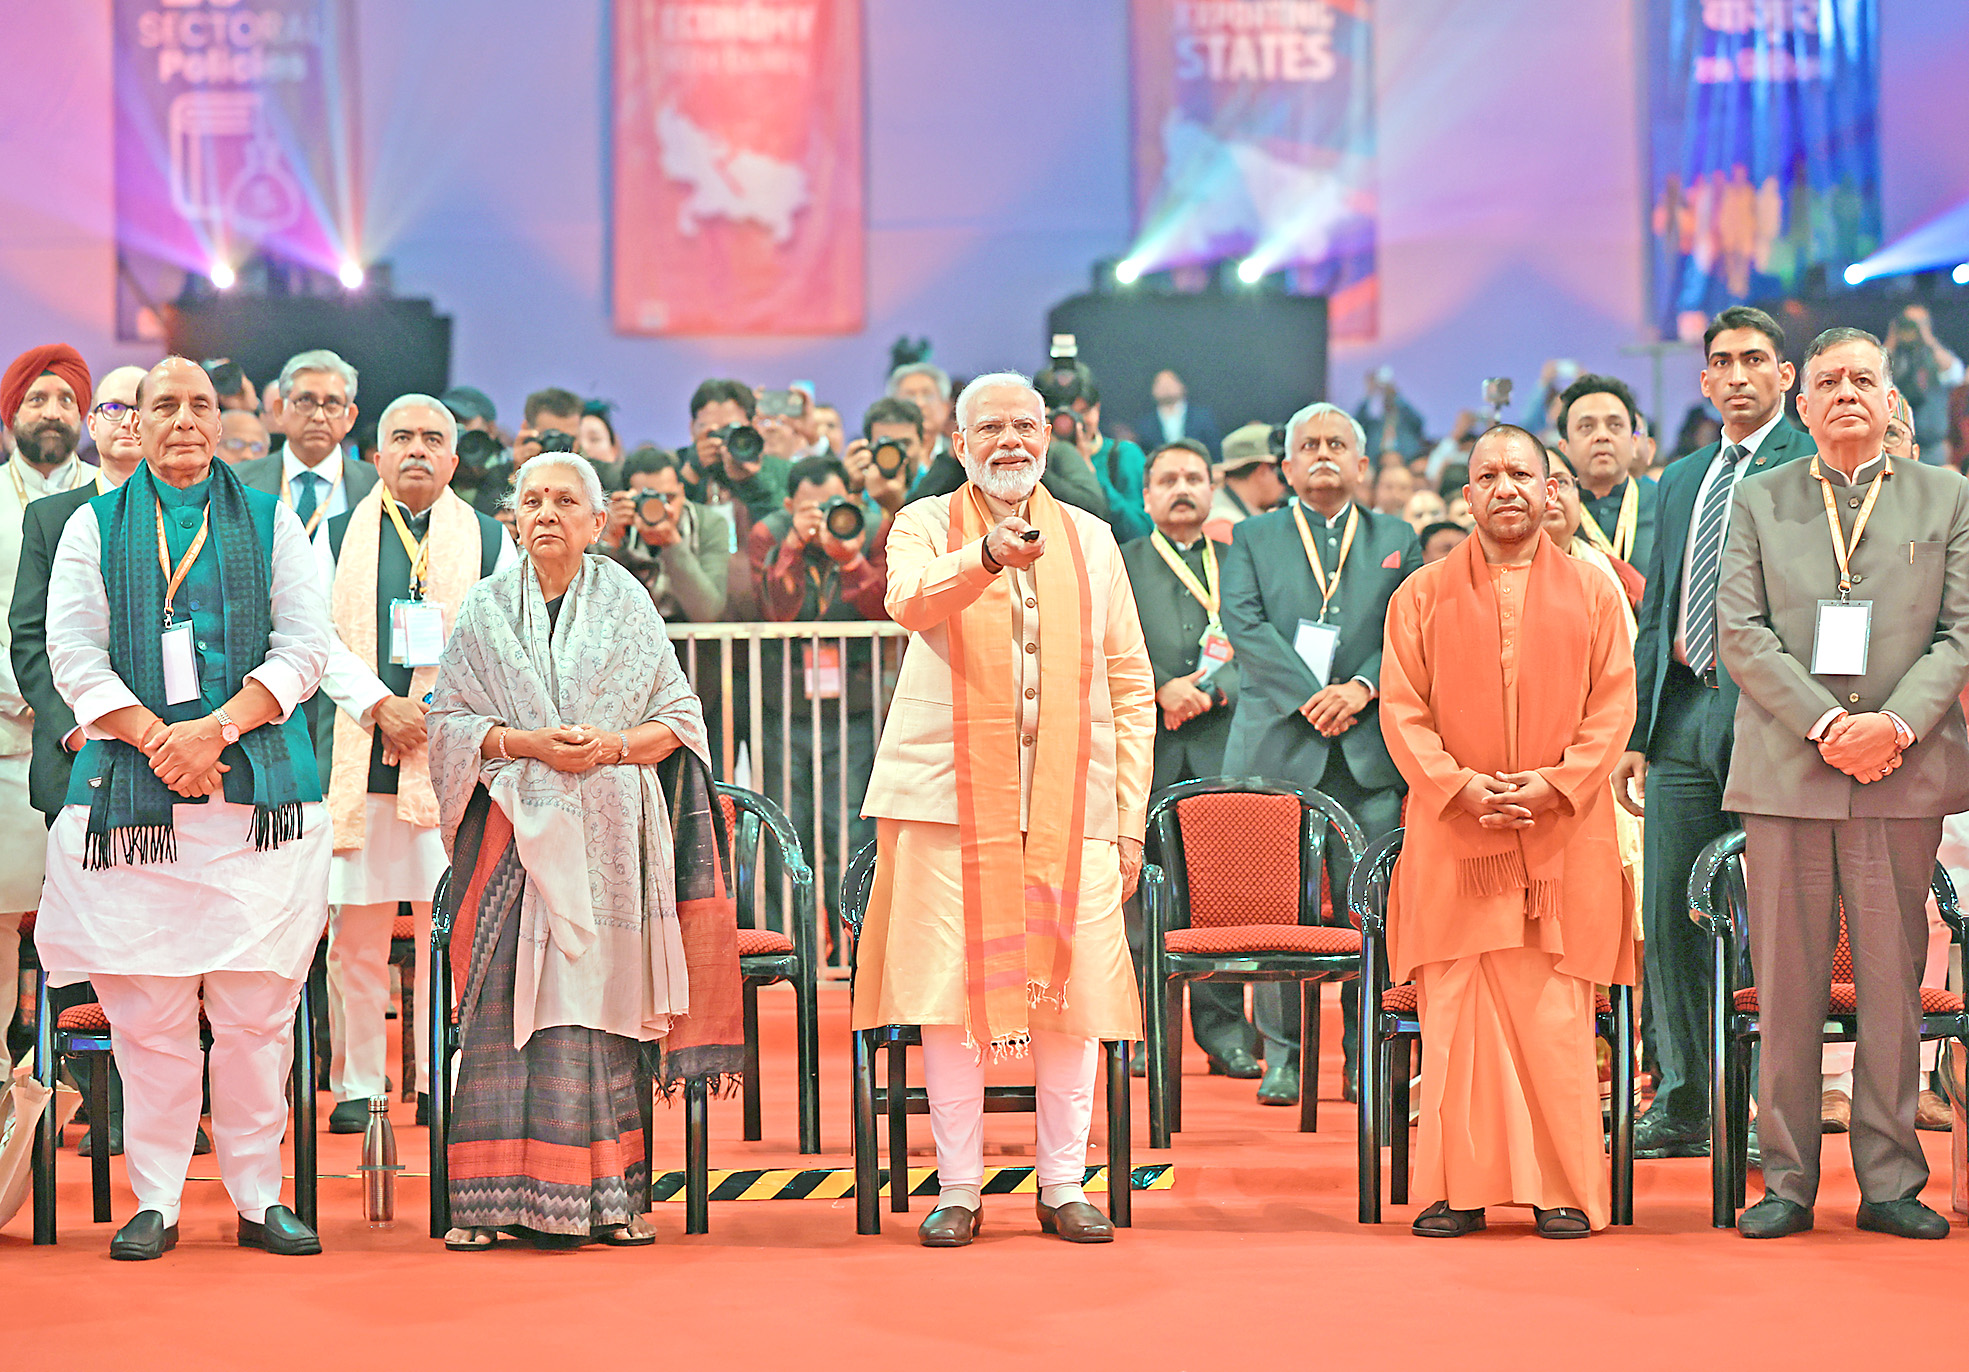 PM Modi with Rajnath Singh, Anandiben Patel, Yogi Adityanath and others at the 4th Groundbreaking Ceremony of the UP Global Investors' Summit, in Lucknow.